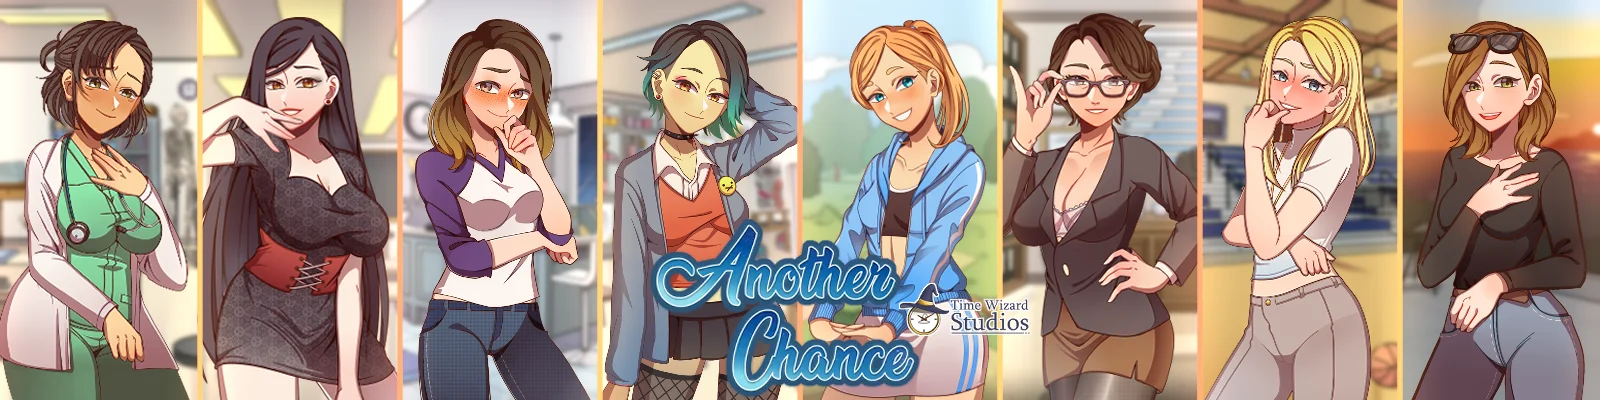 Another Chance v.1.36